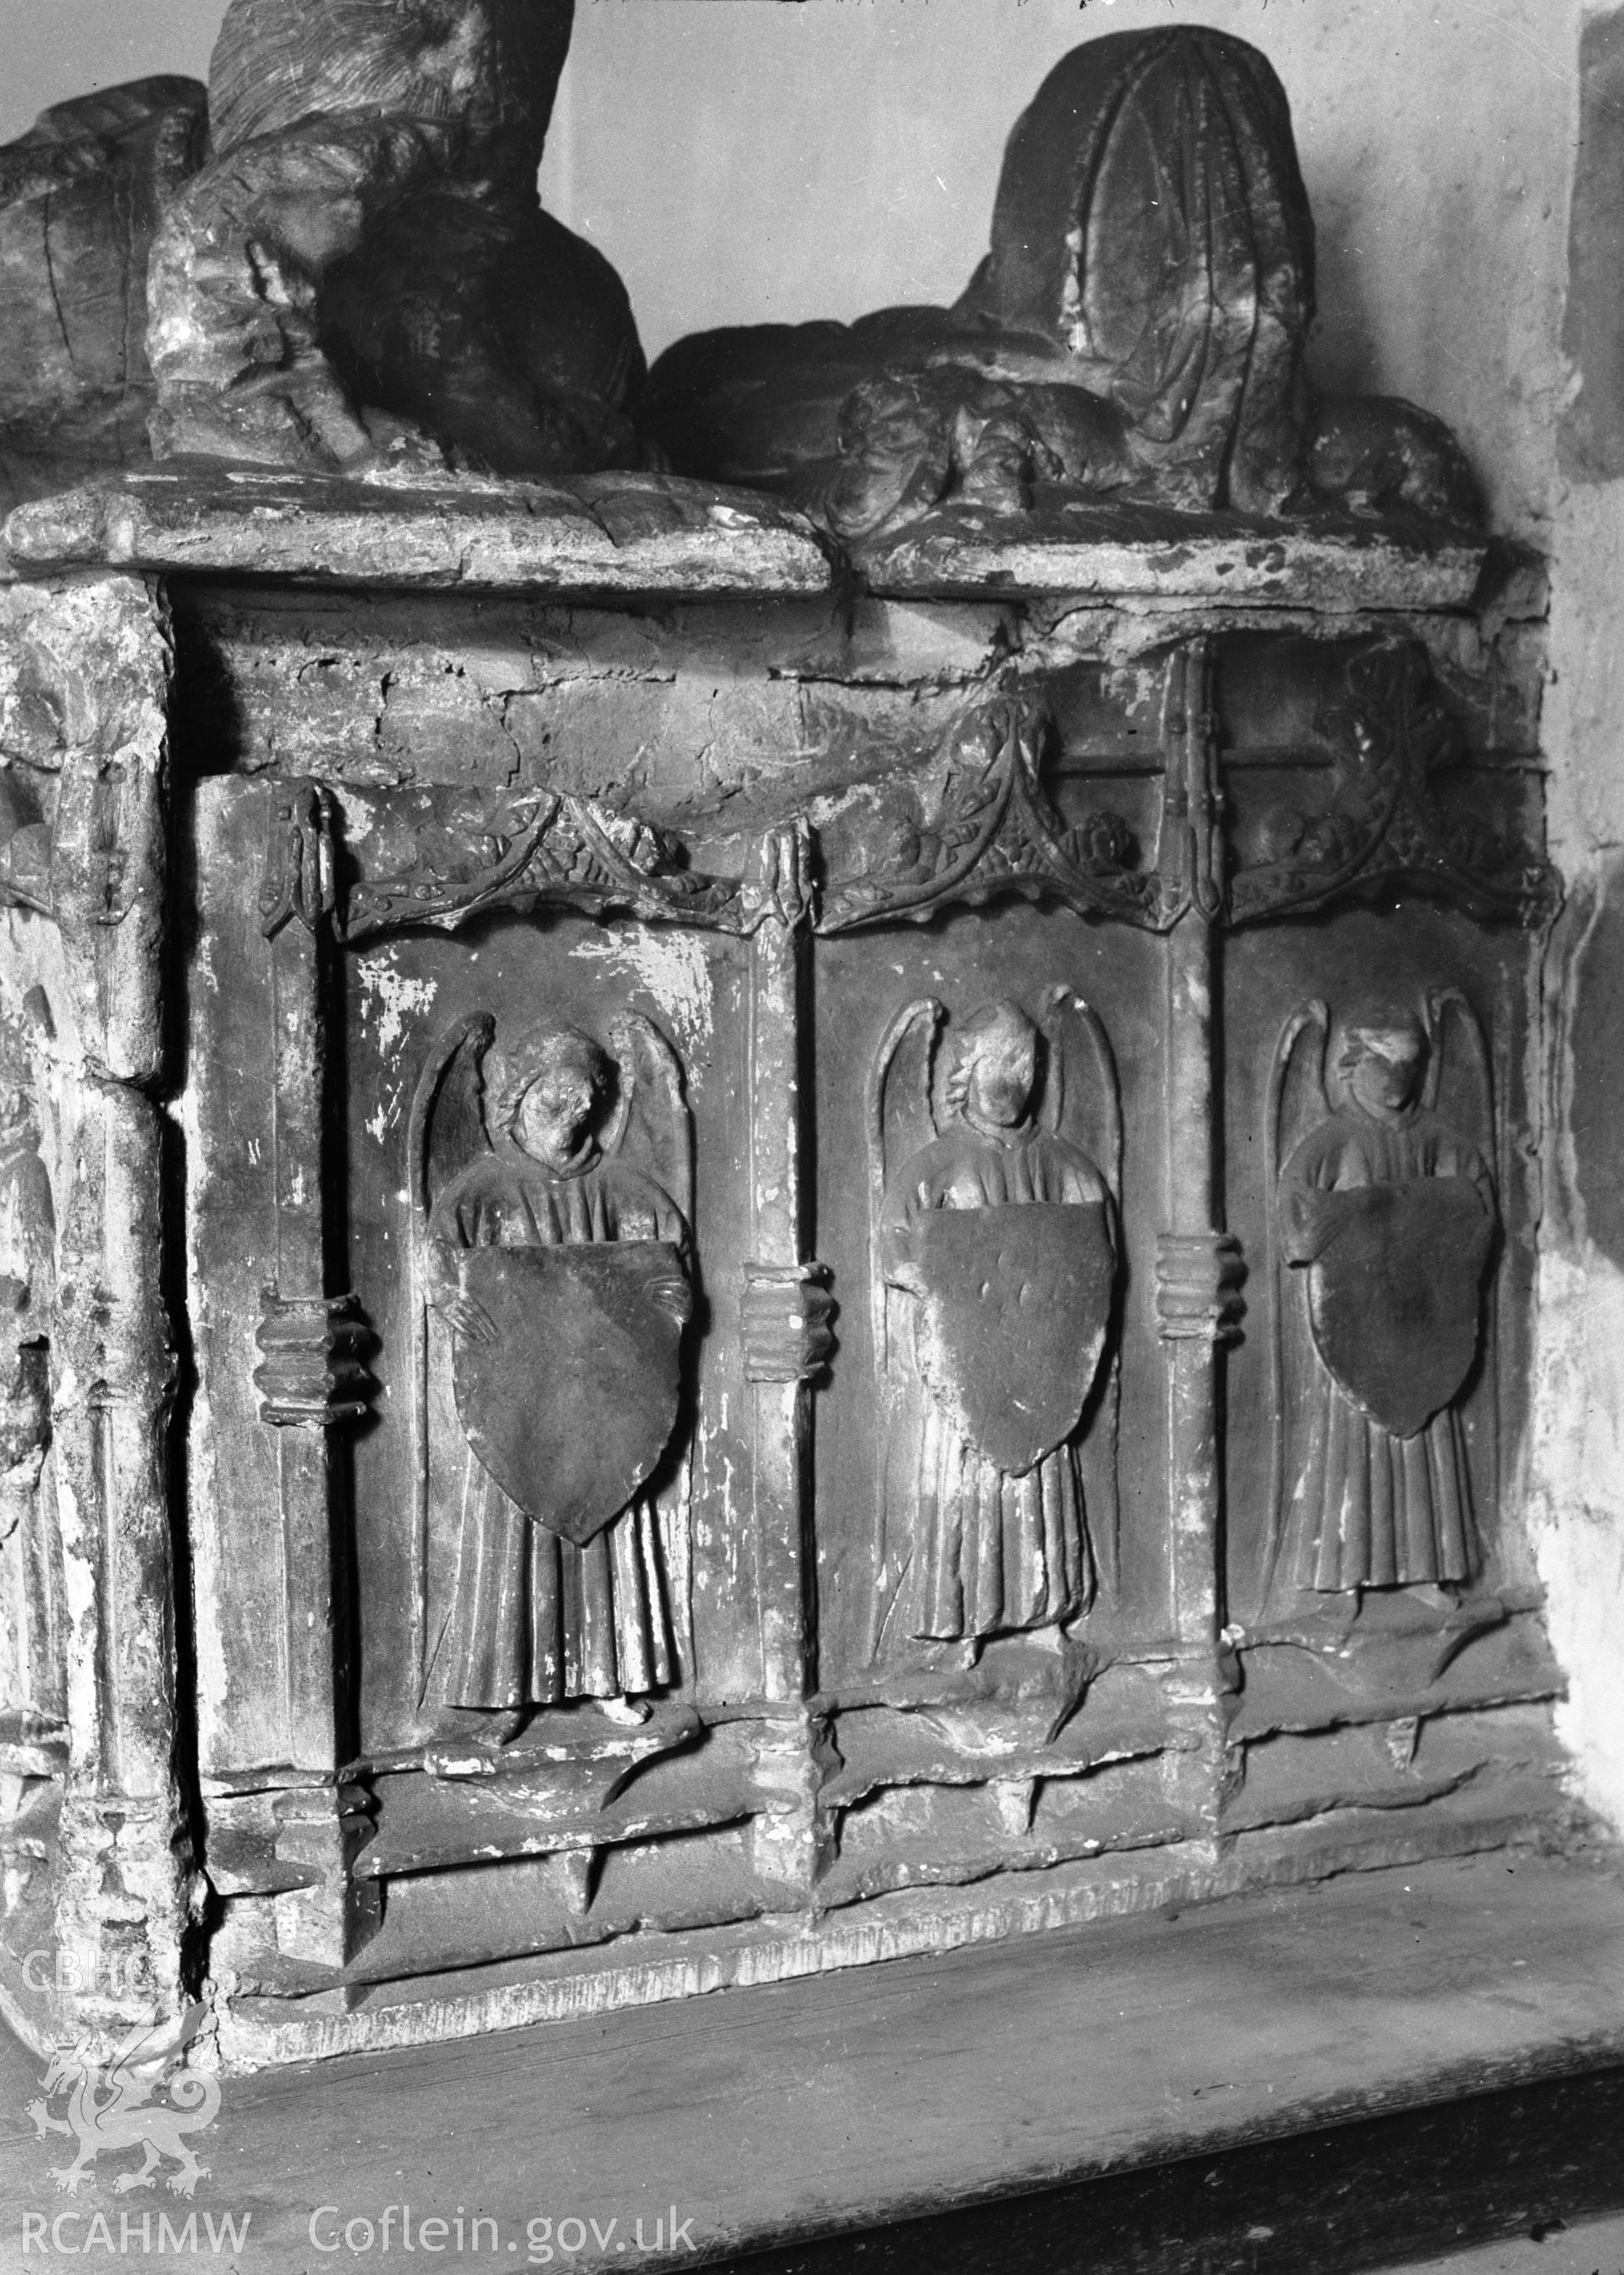 Digitised copy of a black and white negative showing memorial at St Tegai's Church, Llandegai, produced by RCAHMW before 1960